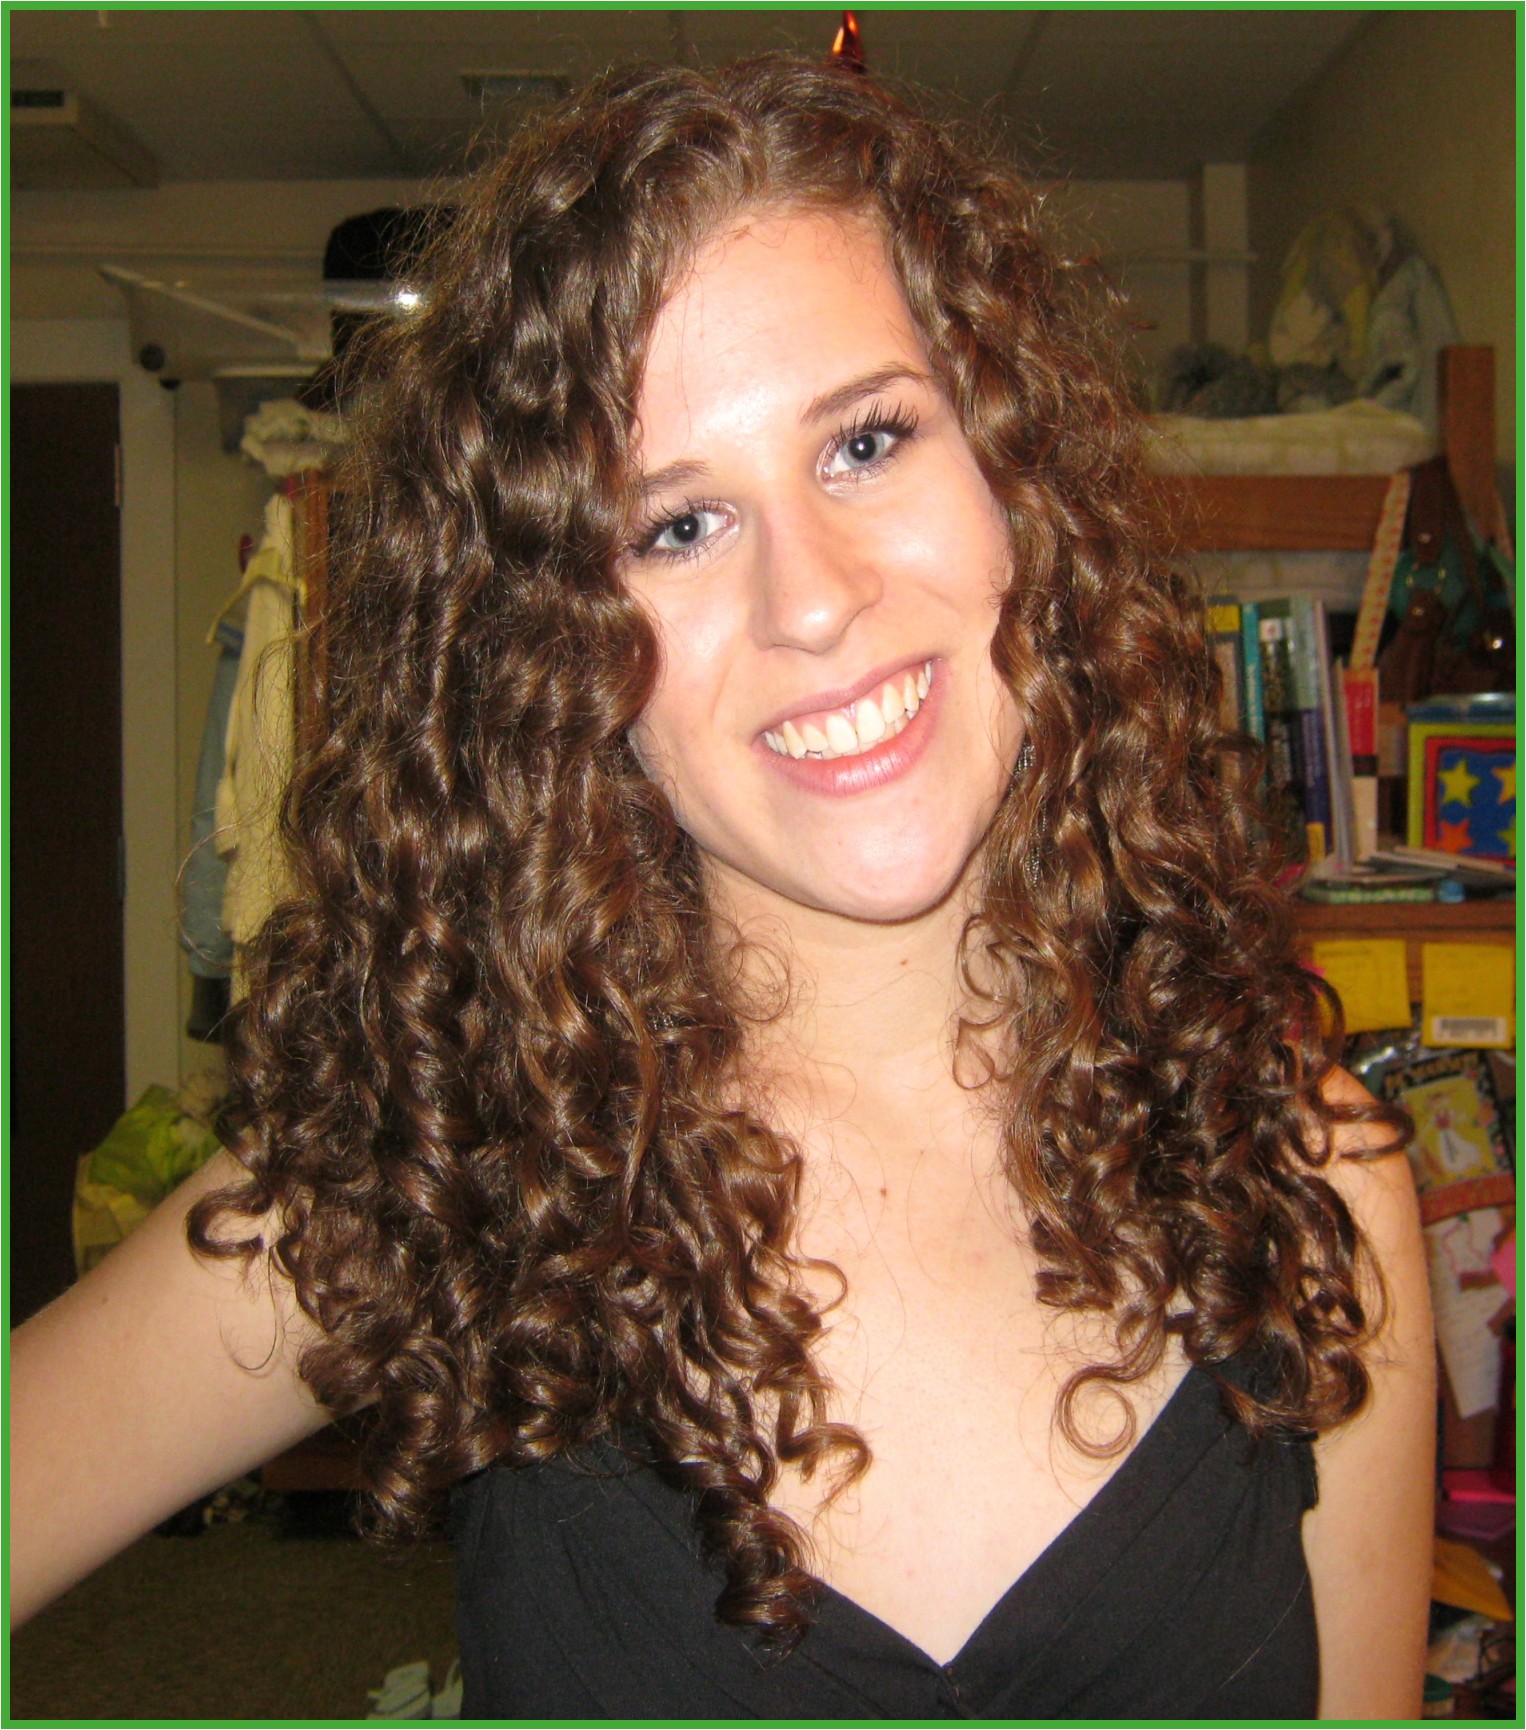 Cool Hairstyles for Girls with Short Hair Exciting Very Curly Hairstyles Fresh Curly Hair 0d Archives Hair